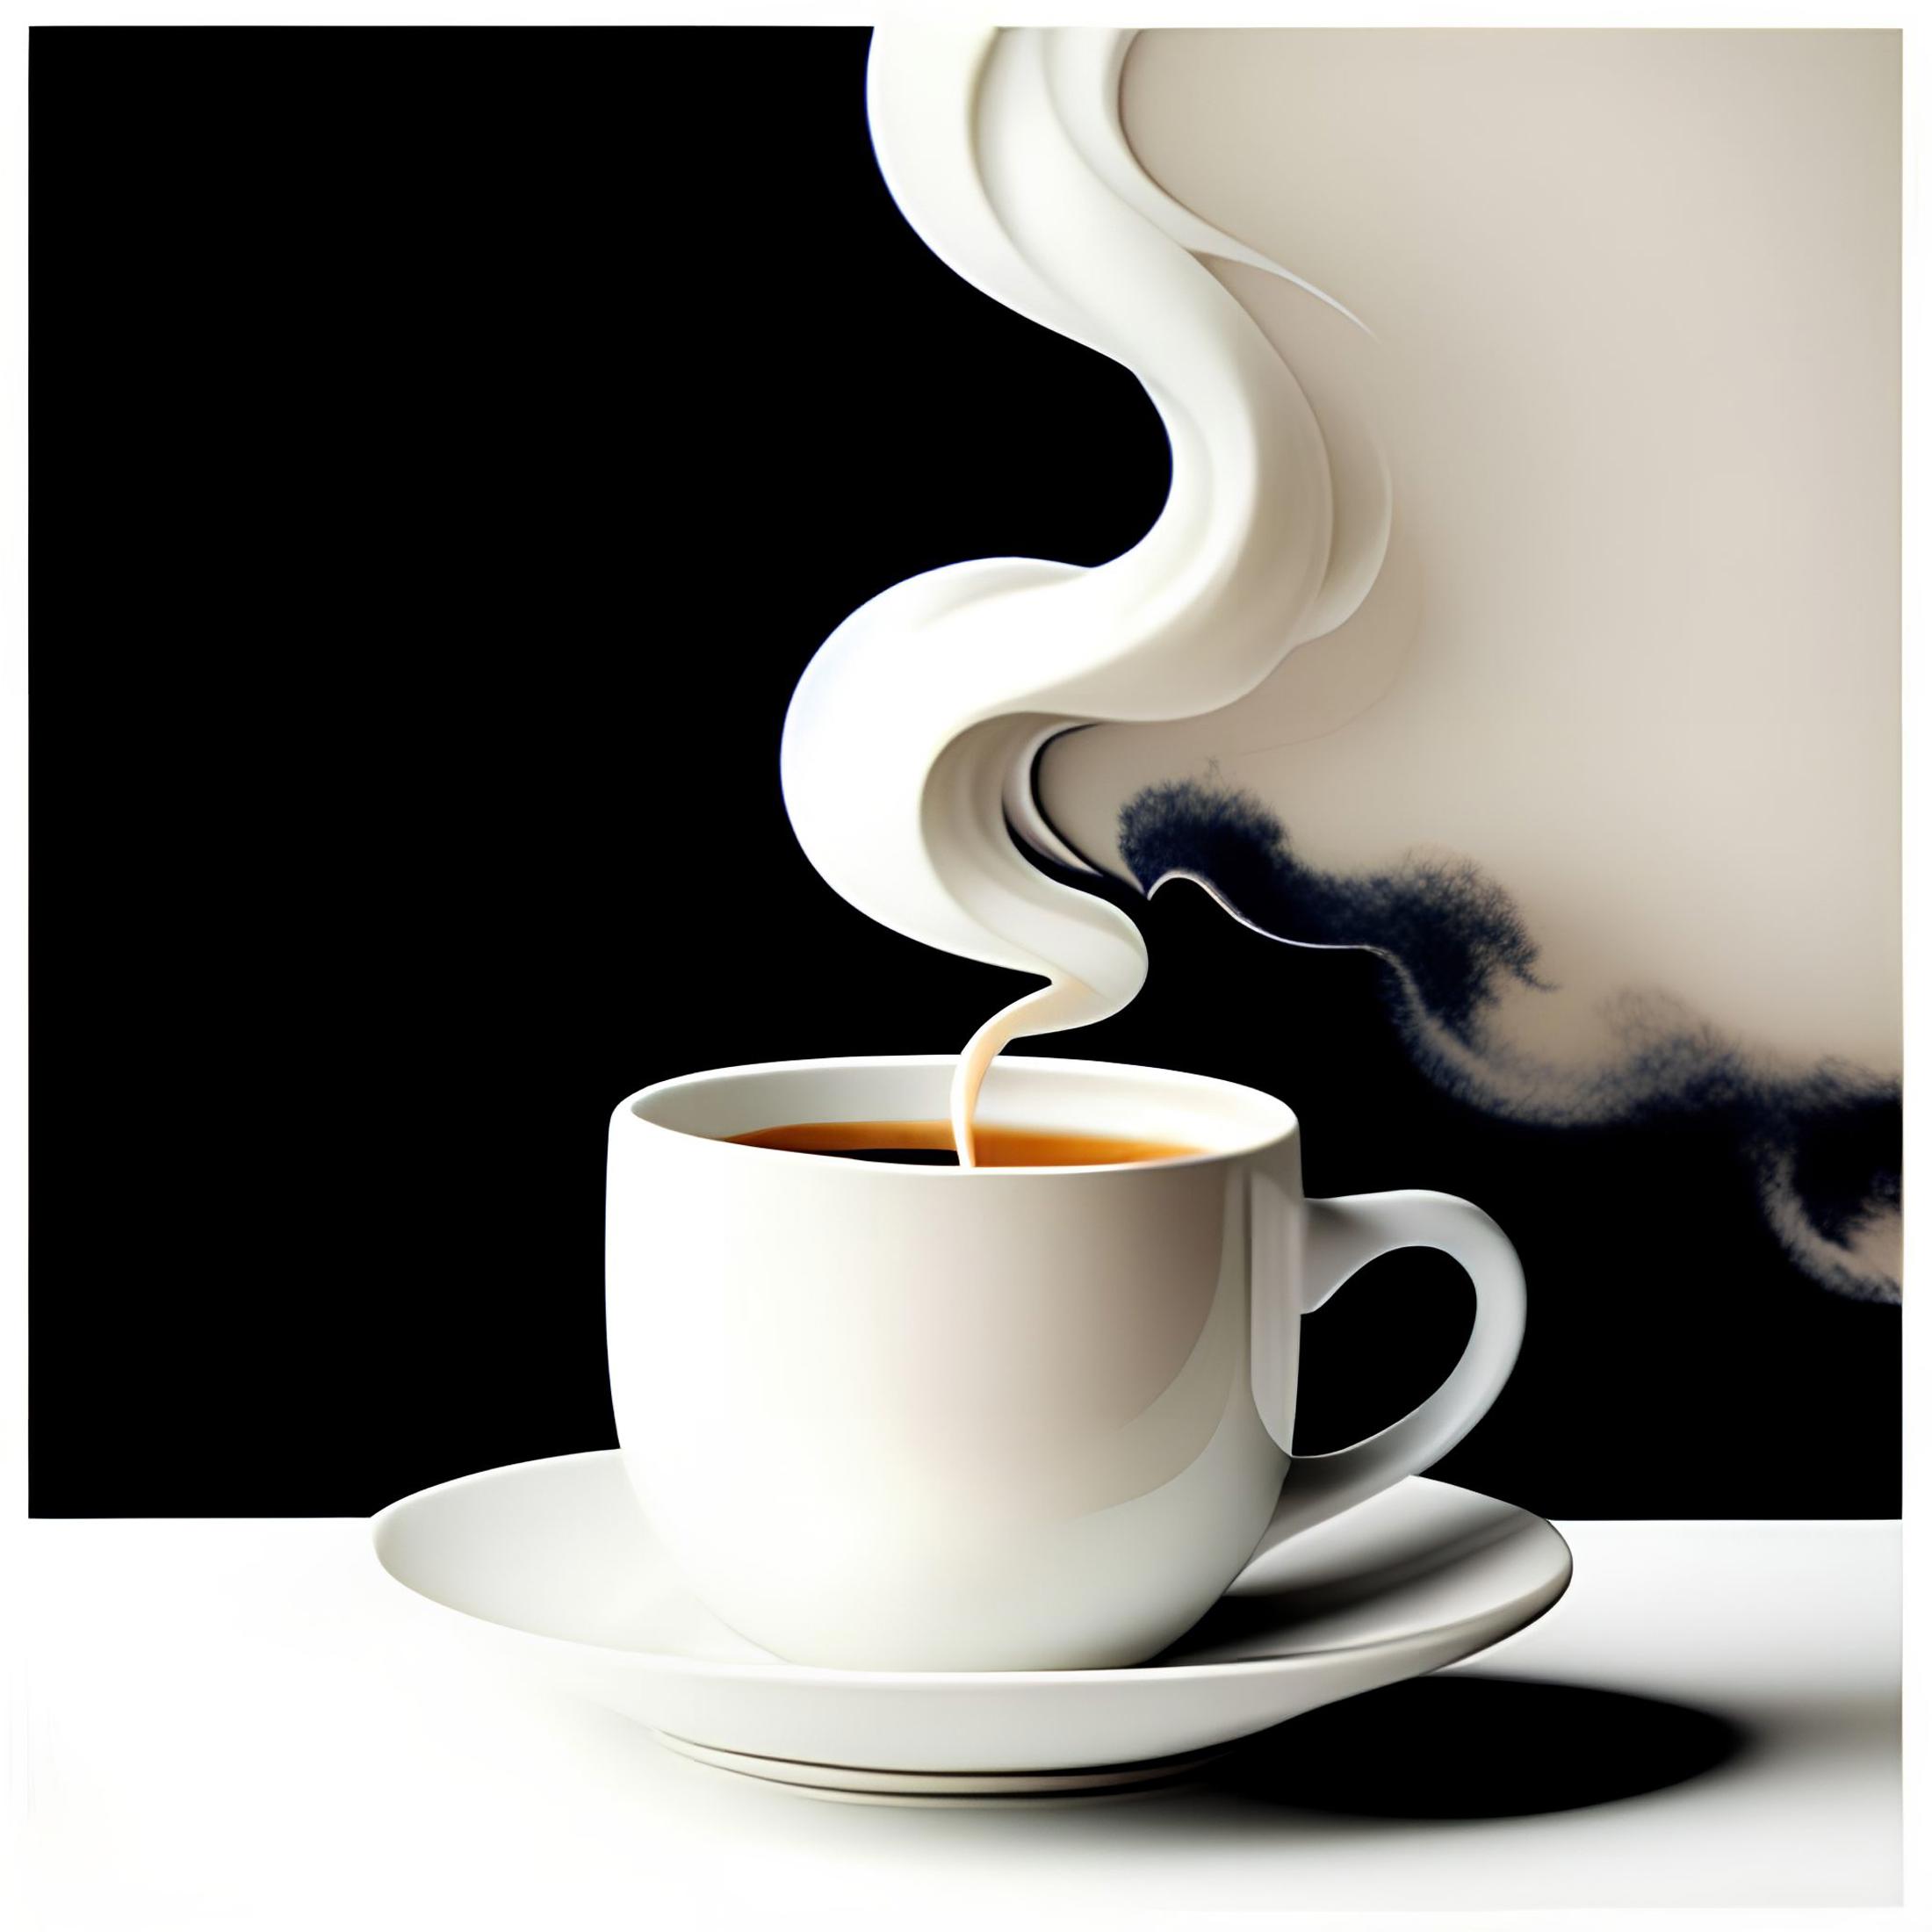 A White Coffee Cup on a Saucer with Steam Rising from the Liquid